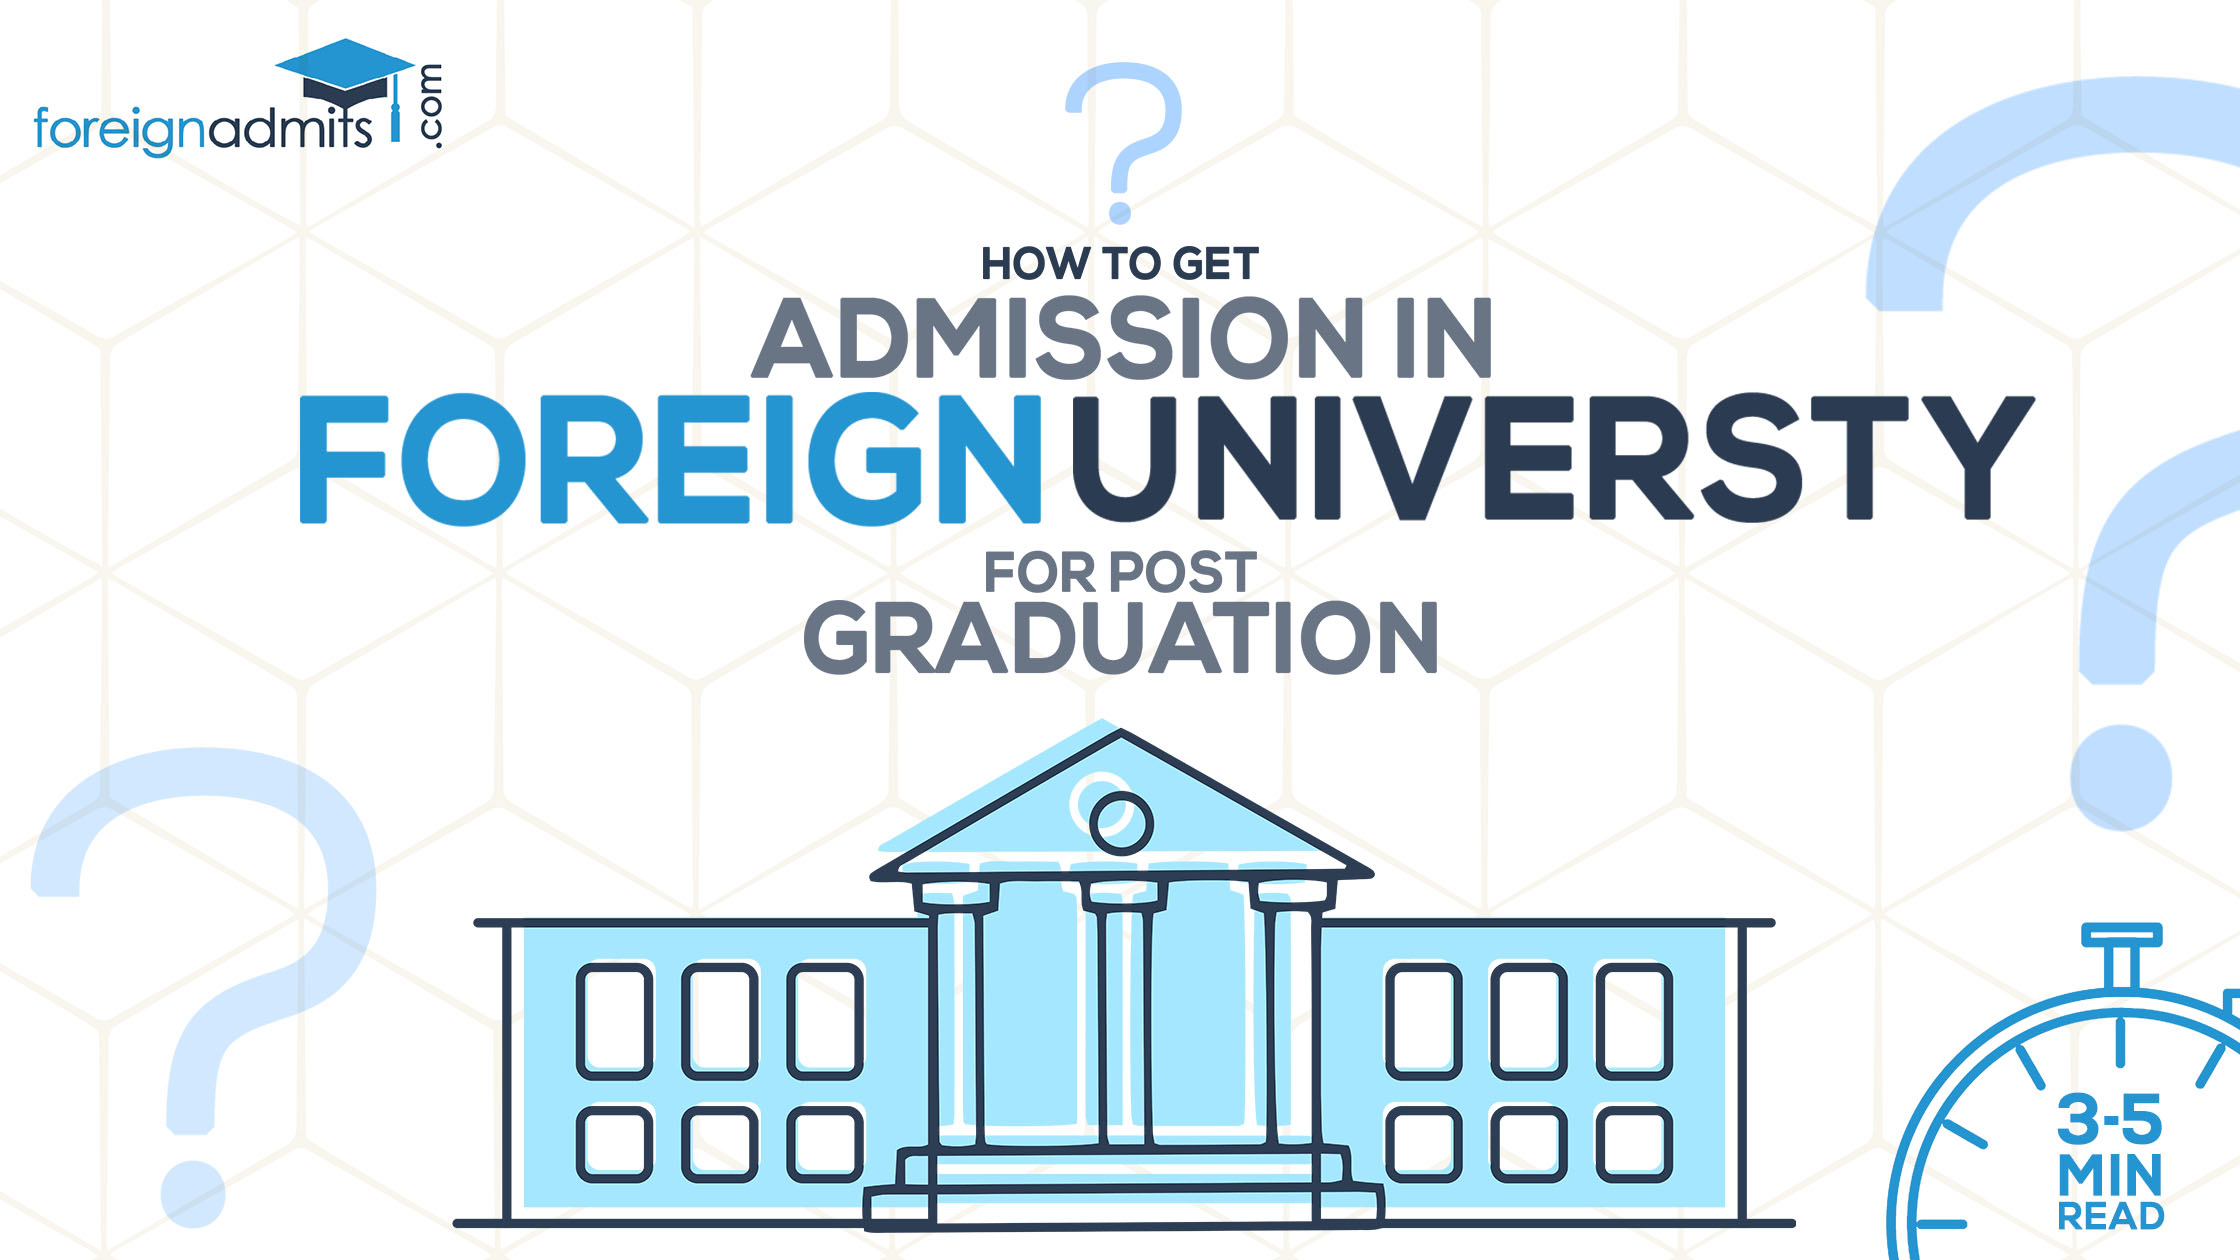 How to Get Admission in Foreign University for Post Graduation?